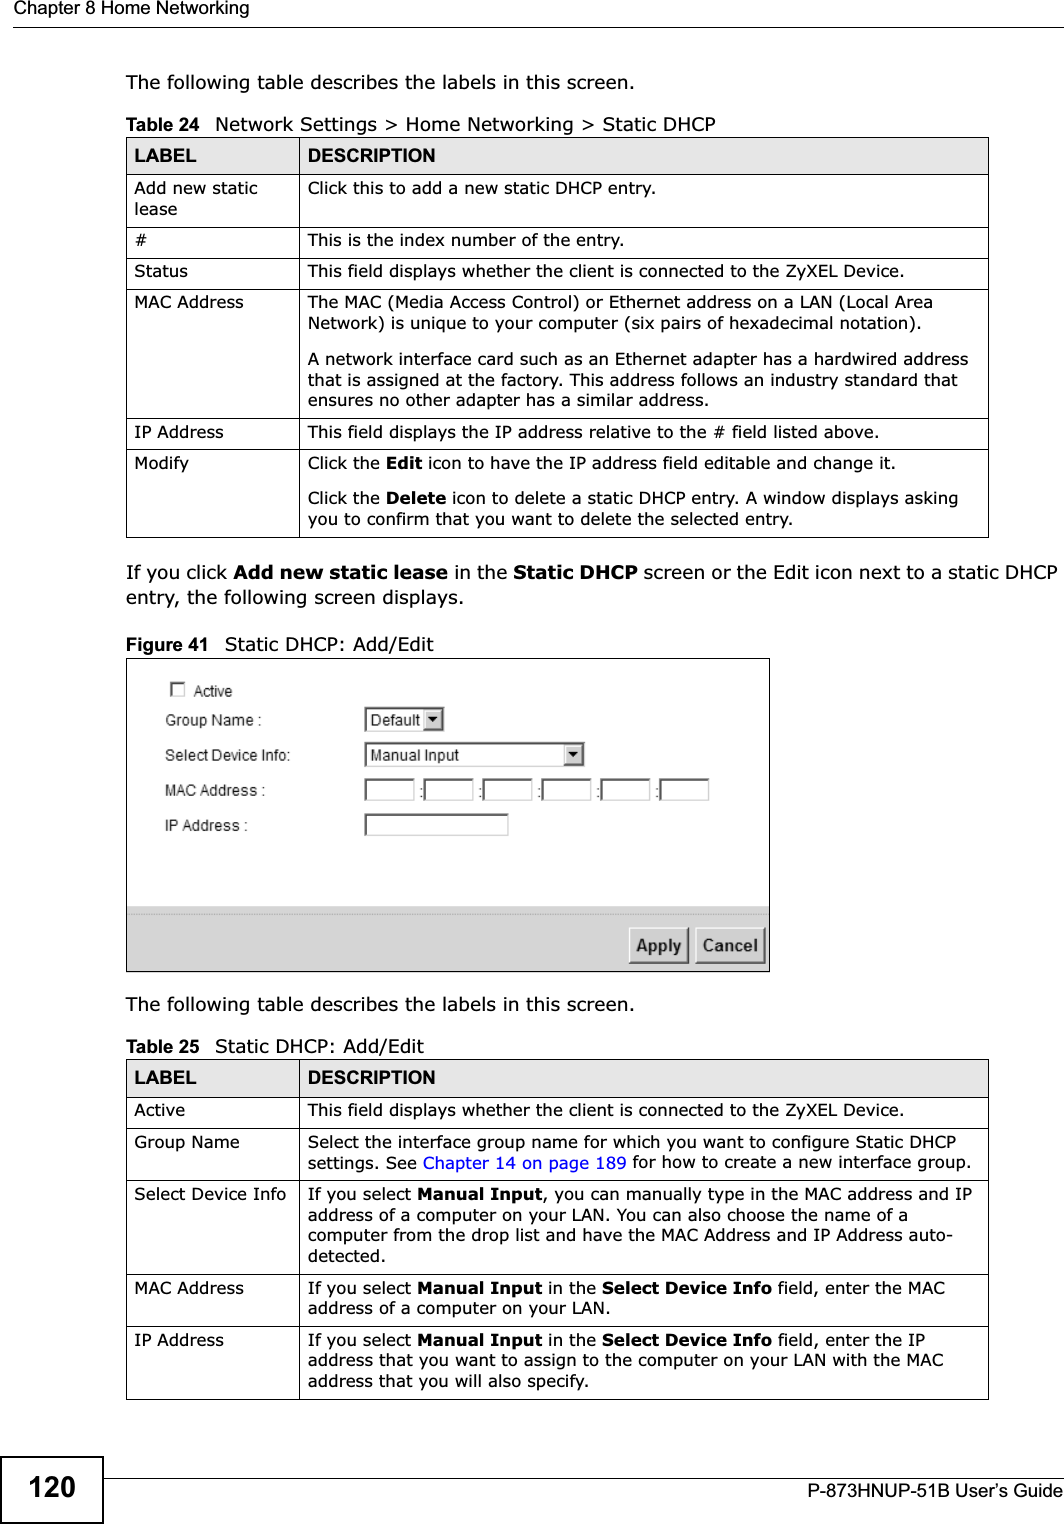 Chapter 8 Home NetworkingP-873HNUP-51B User’s Guide120The following table describes the labels in this screen.If you click Add new static lease in the Static DHCP screen or the Edit icon next to a static DHCP entry, the following screen displays.Figure 41   Static DHCP: Add/EditThe following table describes the labels in this screen.Table 24   Network Settings &gt; Home Networking &gt; Static DHCPLABEL DESCRIPTIONAdd new static leaseClick this to add a new static DHCP entry. # This is the index number of the entry.Status This field displays whether the client is connected to the ZyXEL Device.MAC Address The MAC (Media Access Control) or Ethernet address on a LAN (Local Area Network) is unique to your computer (six pairs of hexadecimal notation).A network interface card such as an Ethernet adapter has a hardwired address that is assigned at the factory. This address follows an industry standard that ensures no other adapter has a similar address.IP Address This field displays the IP address relative to the # field listed above.Modify Click the Edit icon to have the IP address field editable and change it.Click the Delete icon to delete a static DHCP entry. A window displays asking you to confirm that you want to delete the selected entry.Table 25   Static DHCP: Add/EditLABEL DESCRIPTIONActive This field displays whether the client is connected to the ZyXEL Device.Group Name Select the interface group name for which you want to configure Static DHCP settings. See Chapter 14 on page 189 for how to create a new interface group.Select Device Info If you select Manual Input, you can manually type in the MAC address and IP address of a computer on your LAN. You can also choose the name of a computer from the drop list and have the MAC Address and IP Address auto-detected.MAC Address If you select Manual Input in the Select Device Info field, enter the MAC address of a computer on your LAN.IP Address If you select Manual Input in the Select Device Info field, enter the IP address that you want to assign to the computer on your LAN with the MAC address that you will also specify.